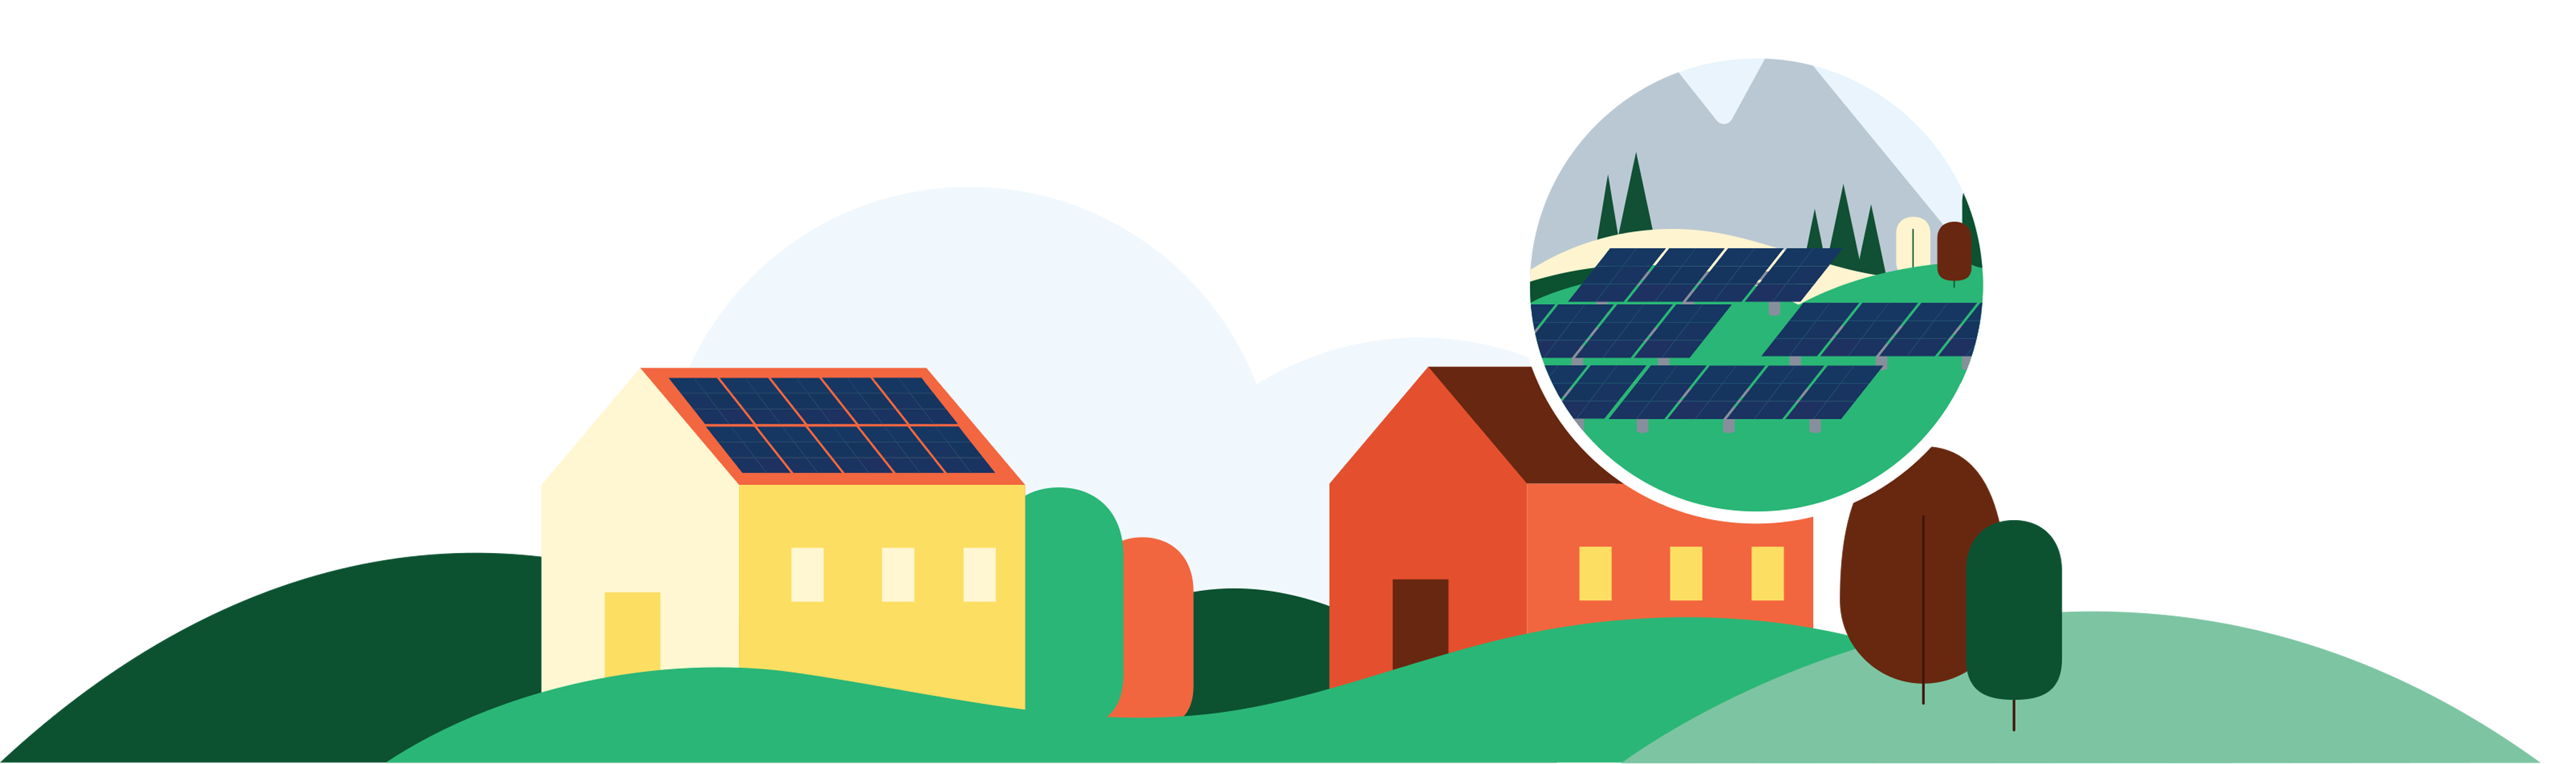 difference between local solar and community solar